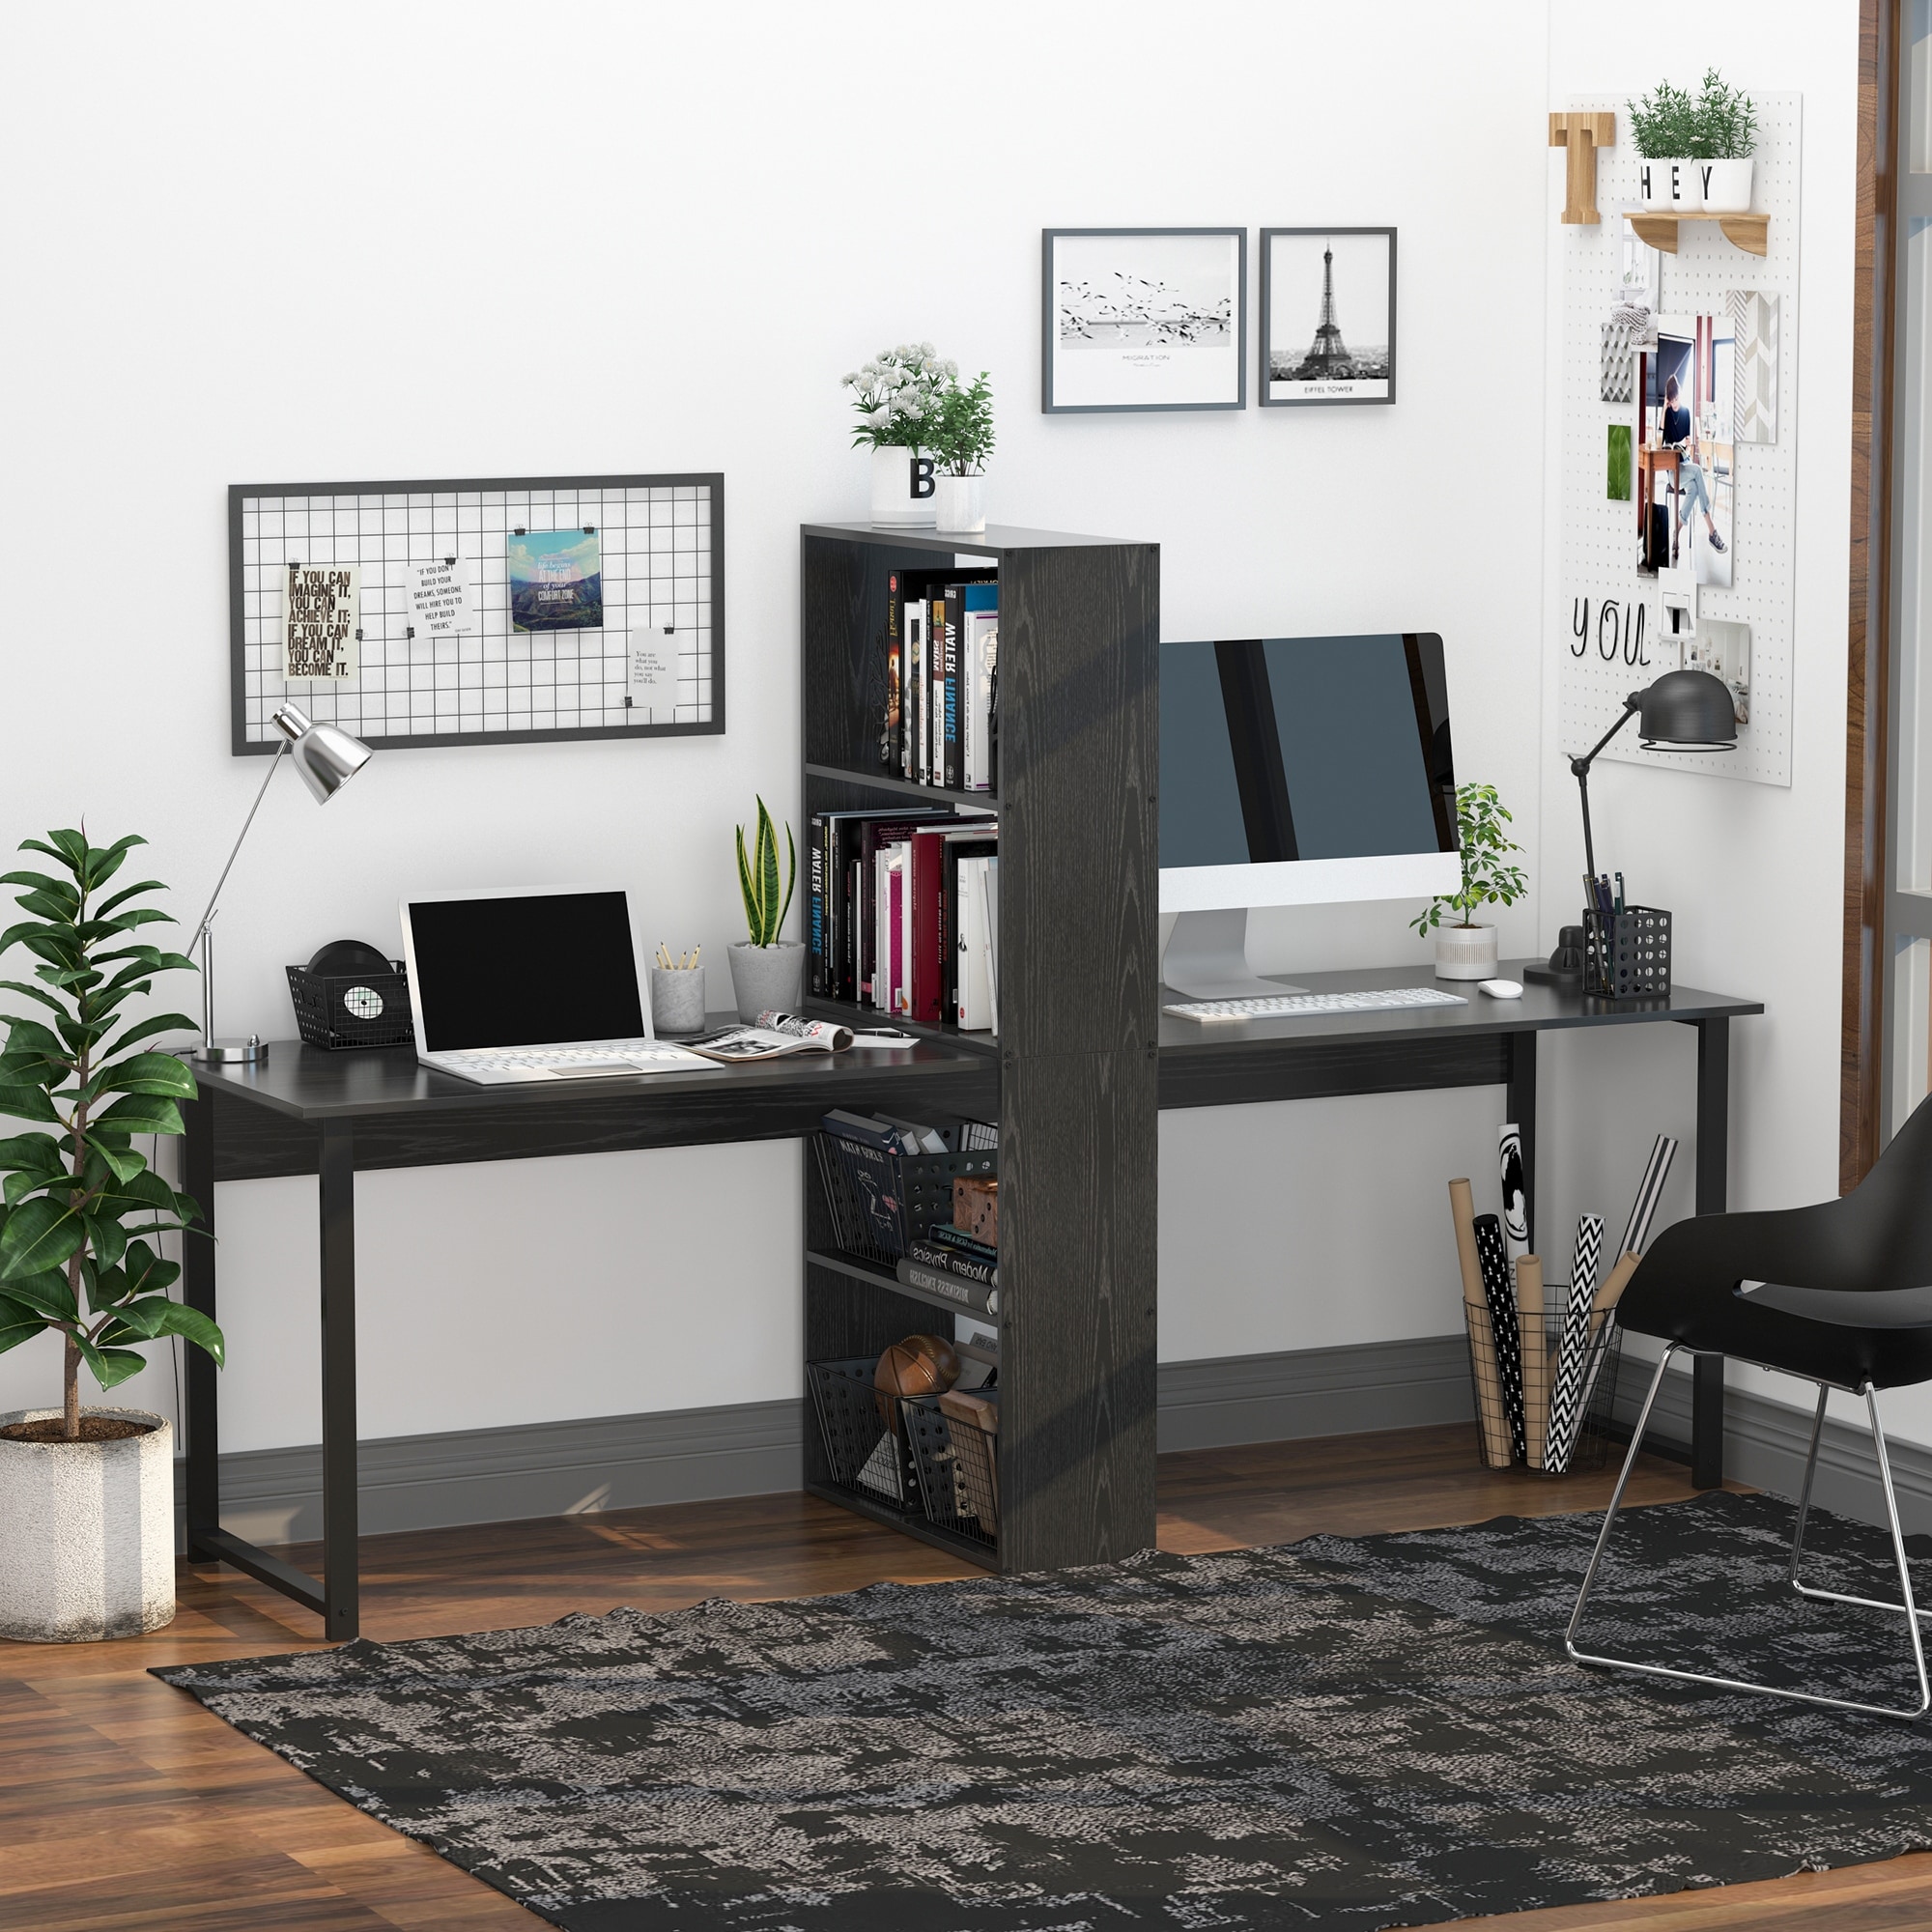 HOMCOM 88” Extra Long 2-Person Computer Desk with Bookshelf Combo Double Workstation Storage Unit Home Office - Black